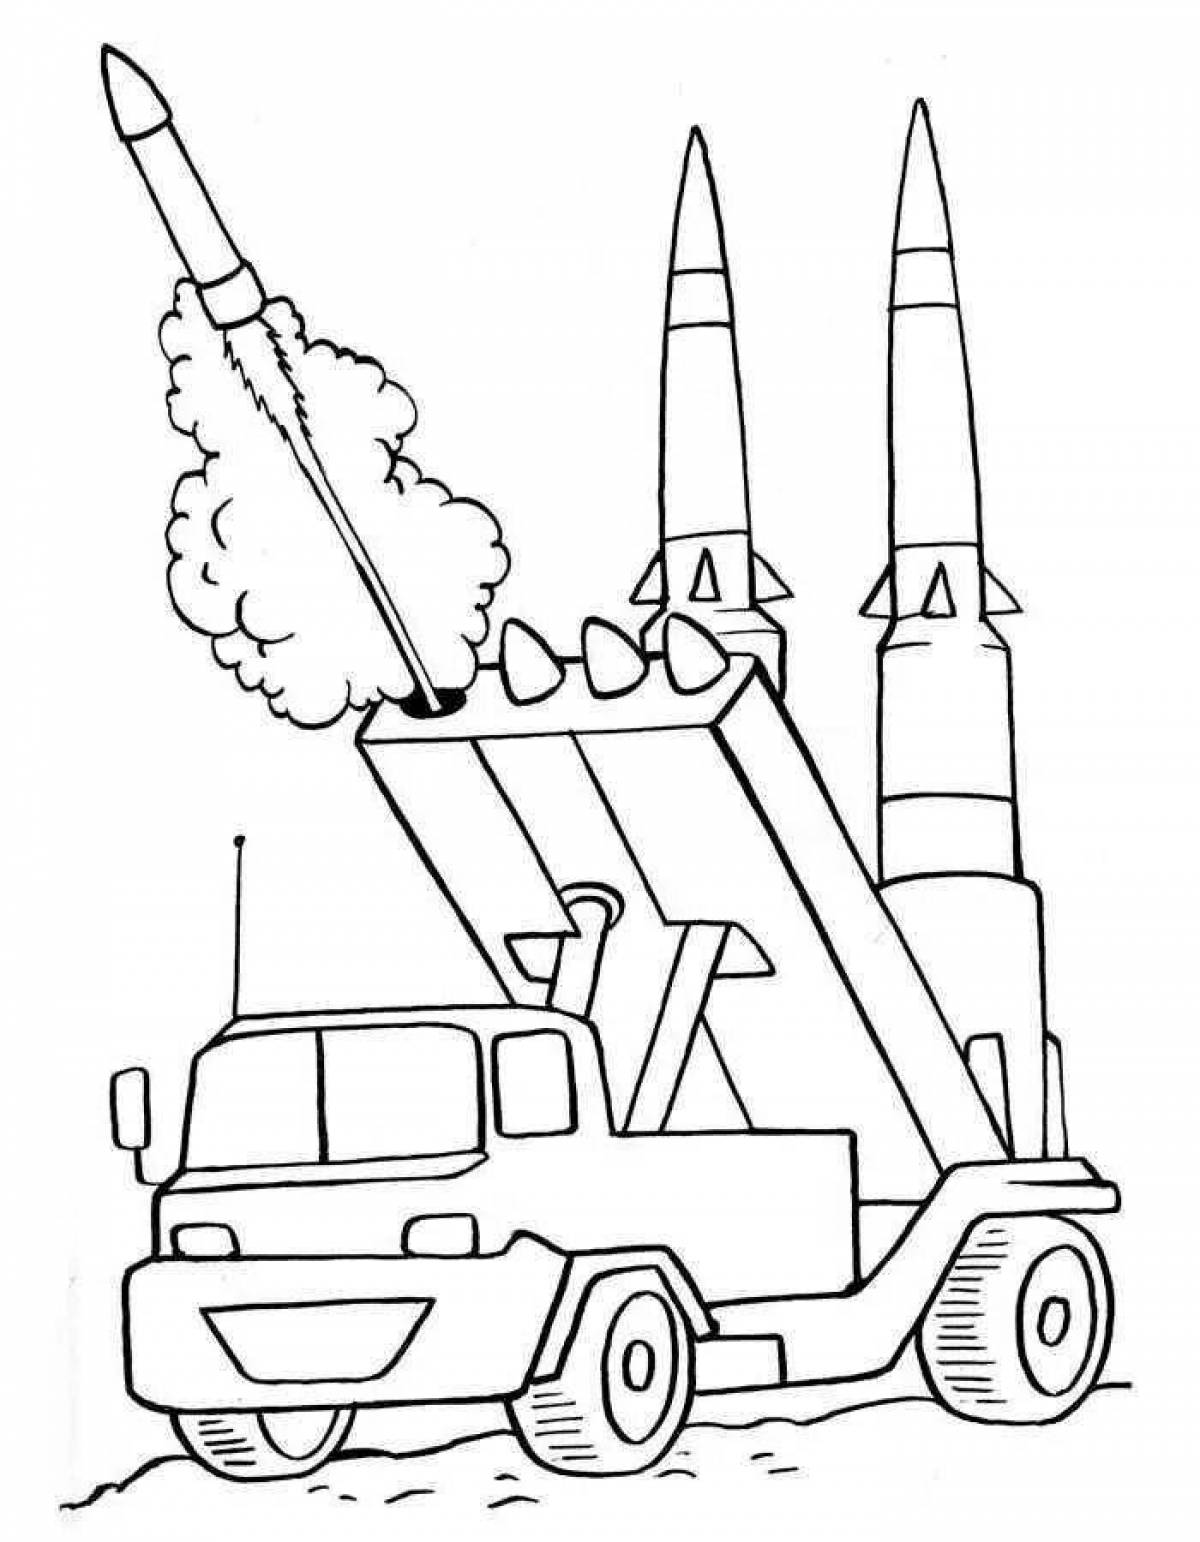 Great Russian military equipment coloring page